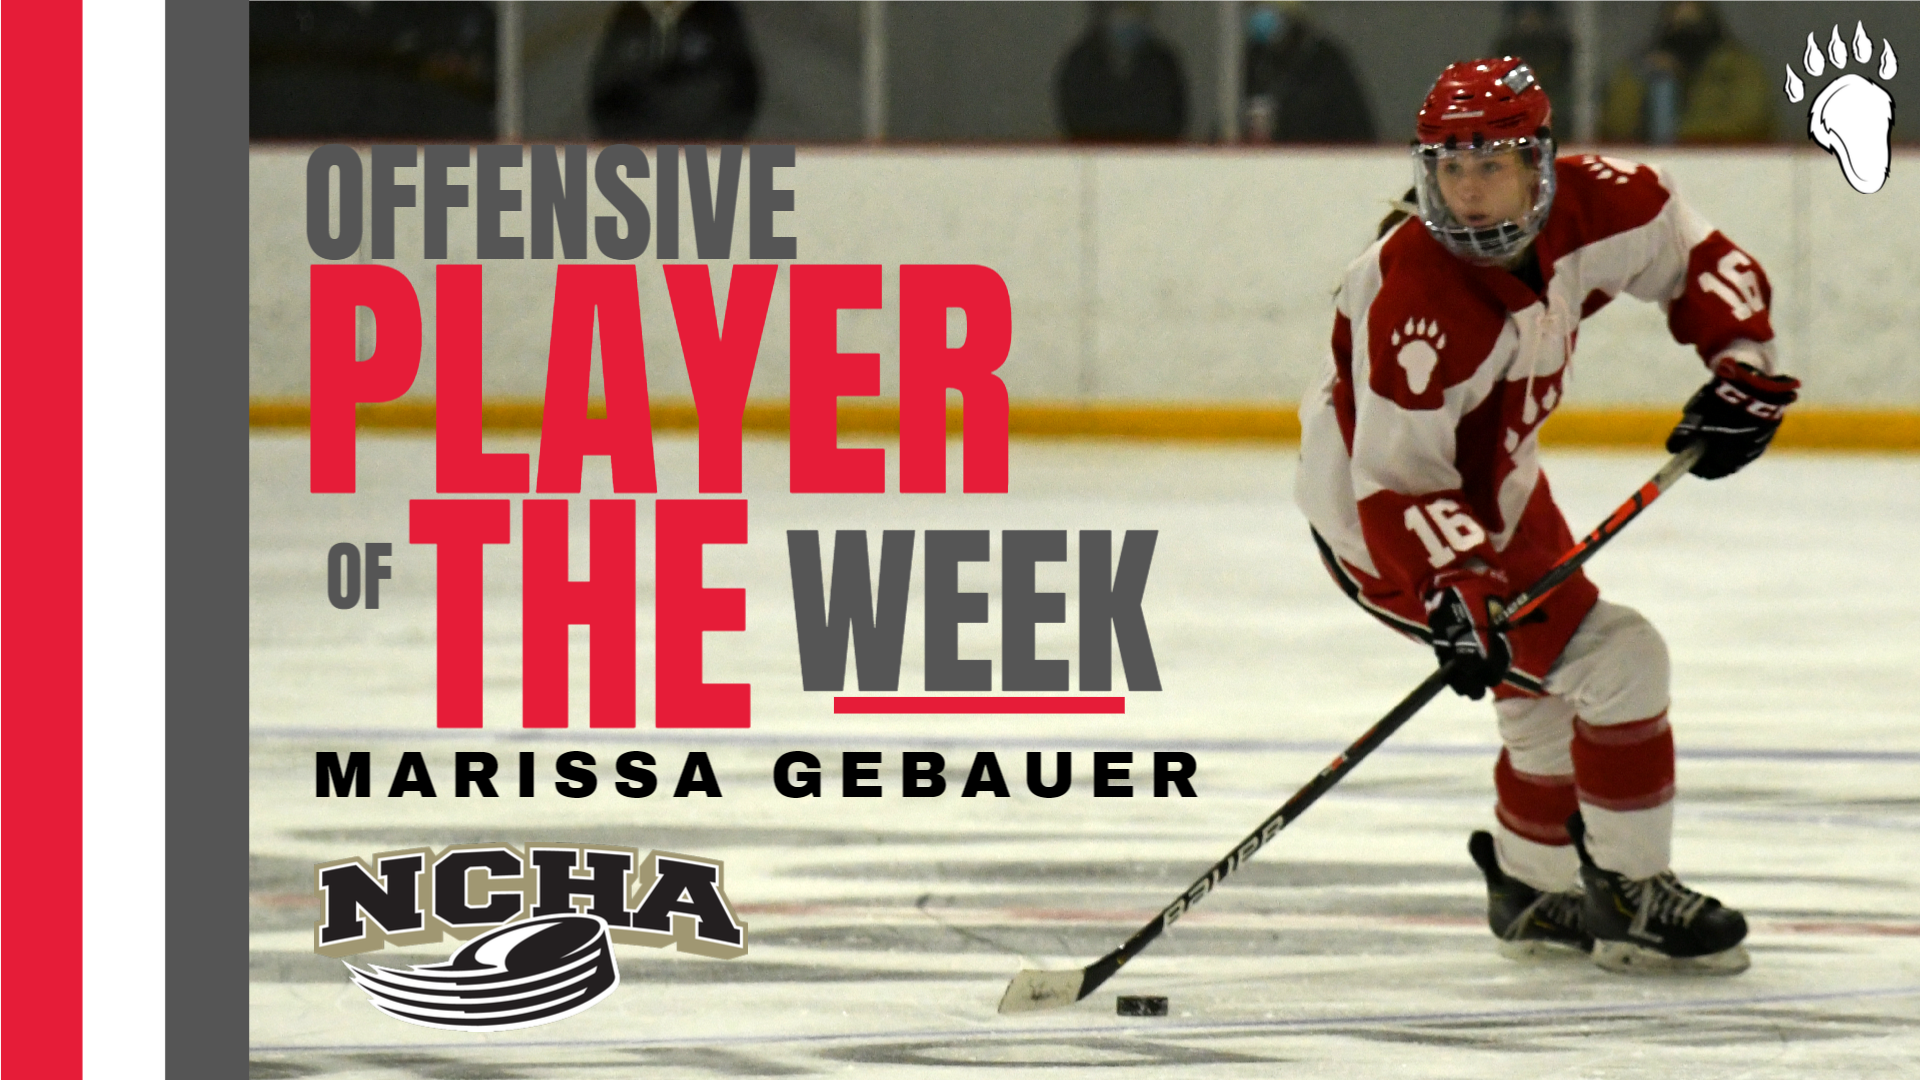 Marissa Gebauer Named NCHA Offensive Player of the Week